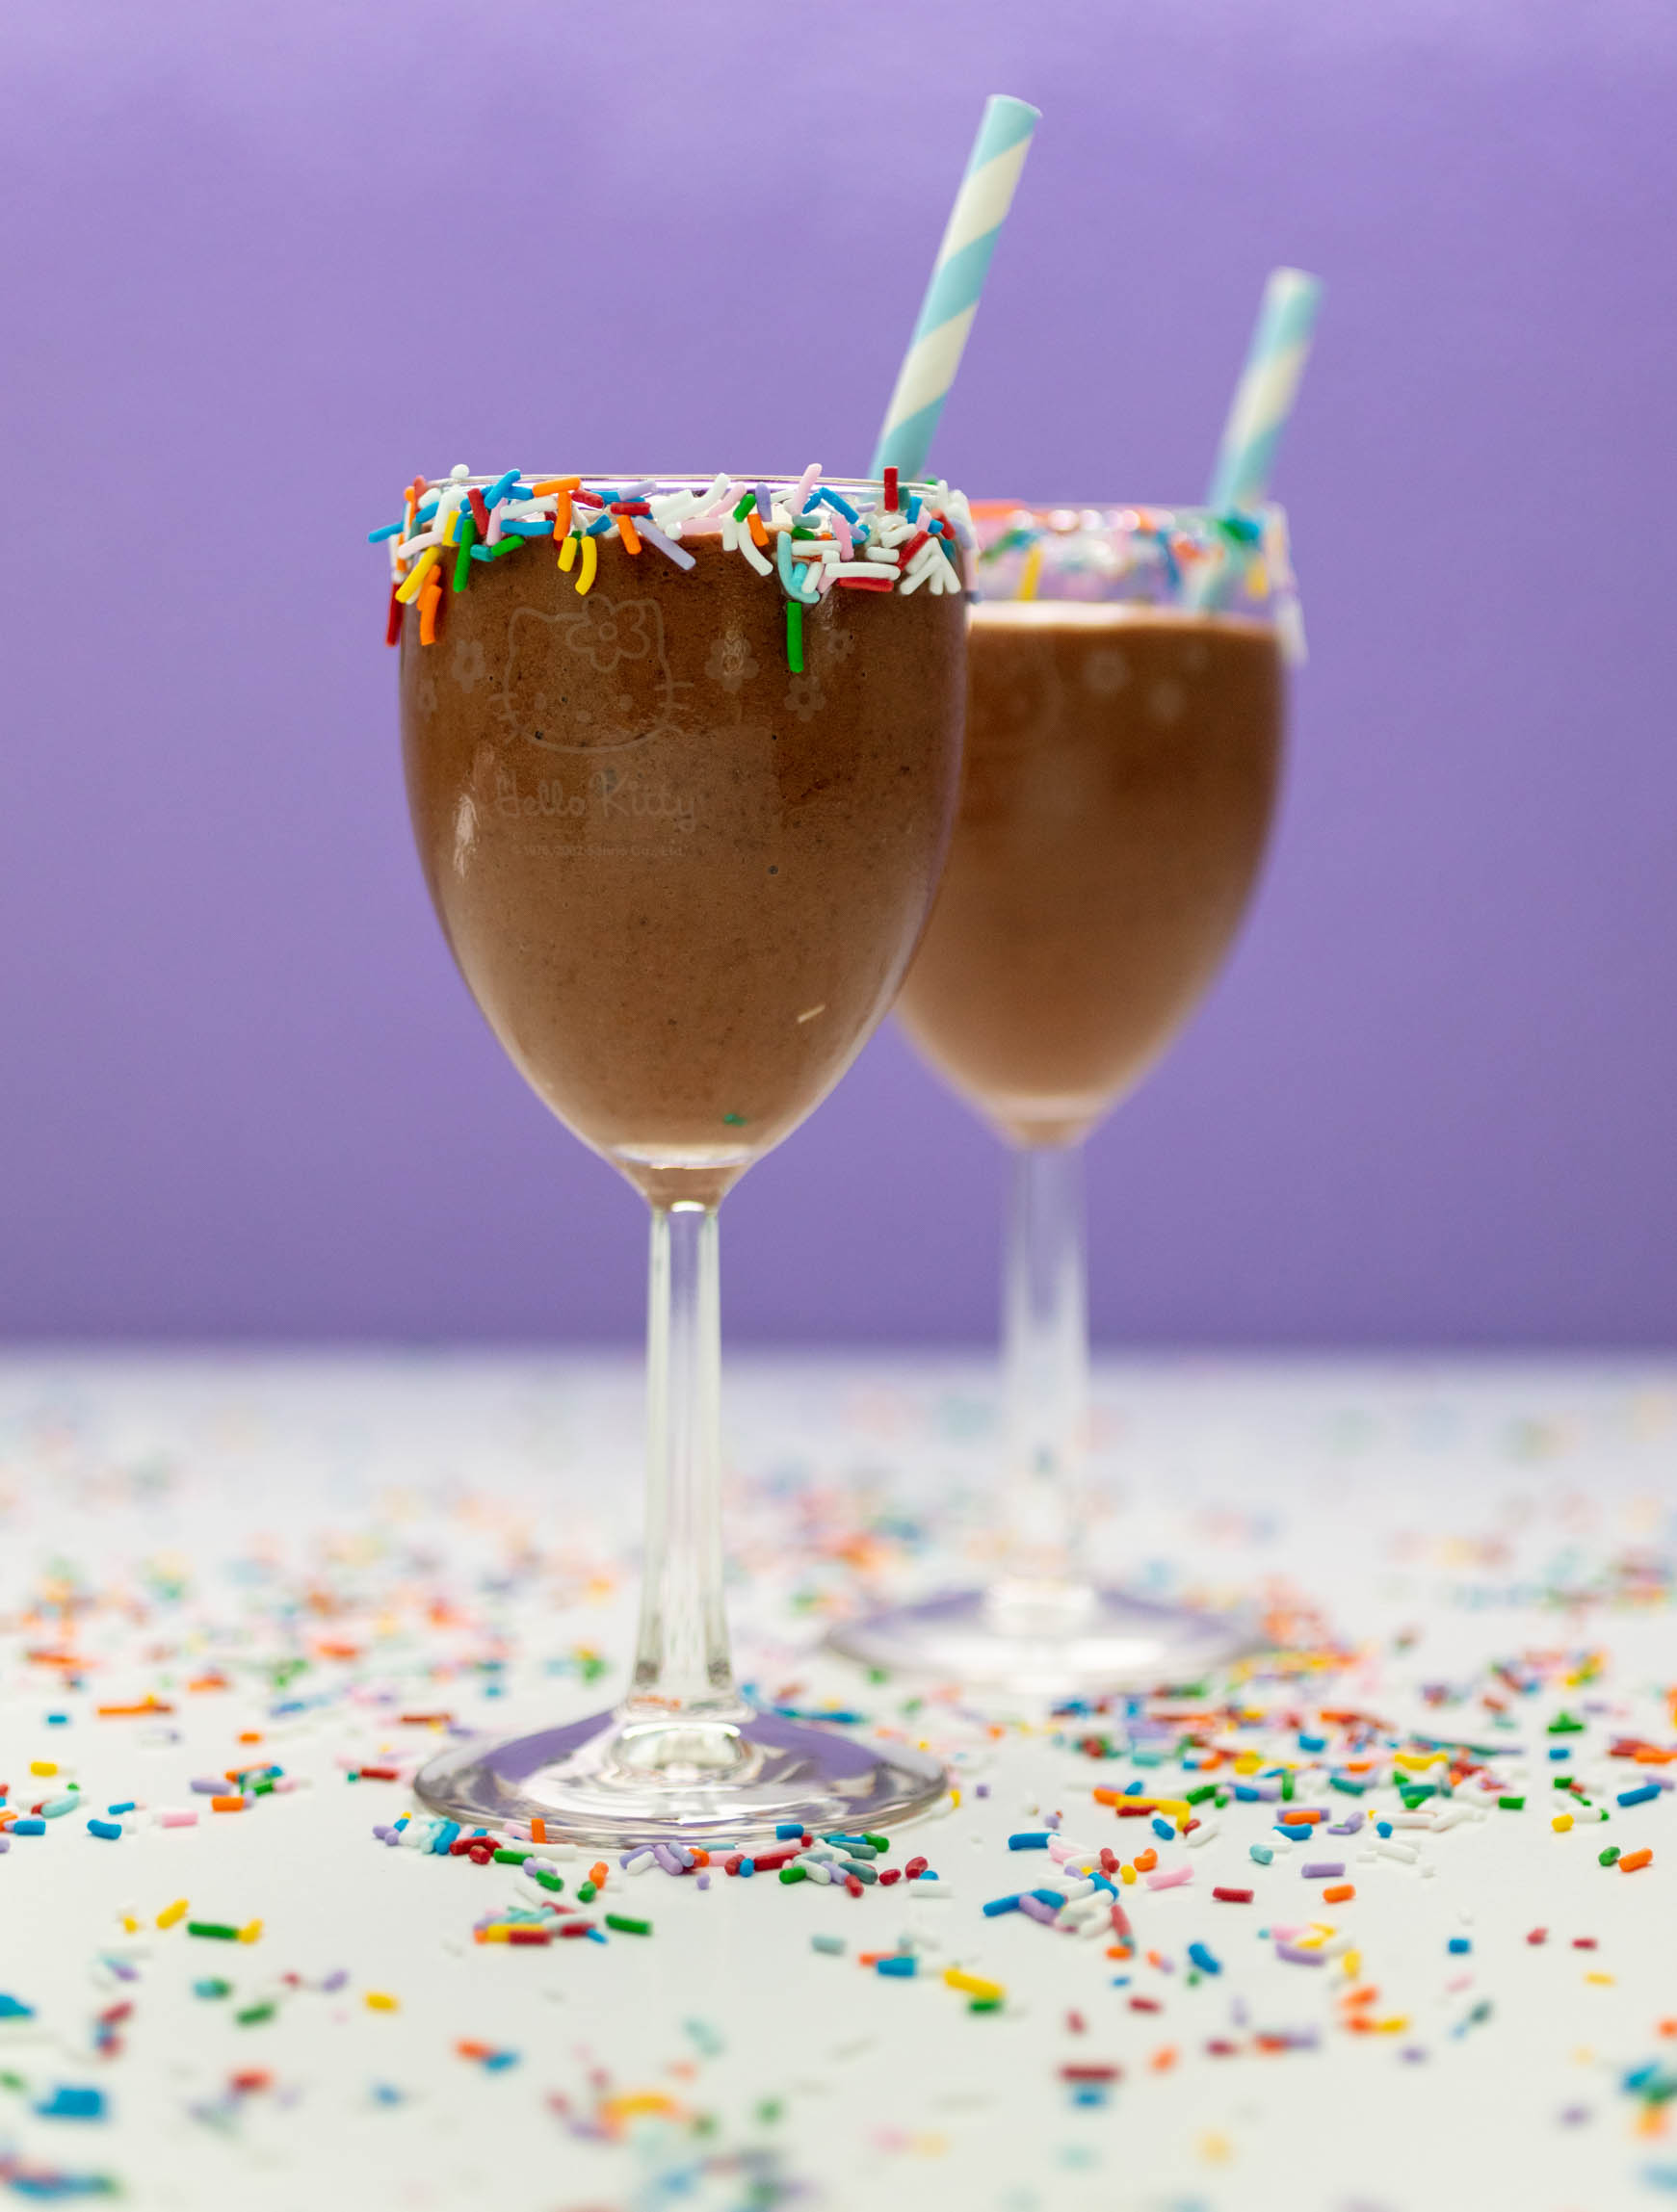 2 hello kitty wine glasses with sprinkles on the rim, filled with vegan chocolate shakes